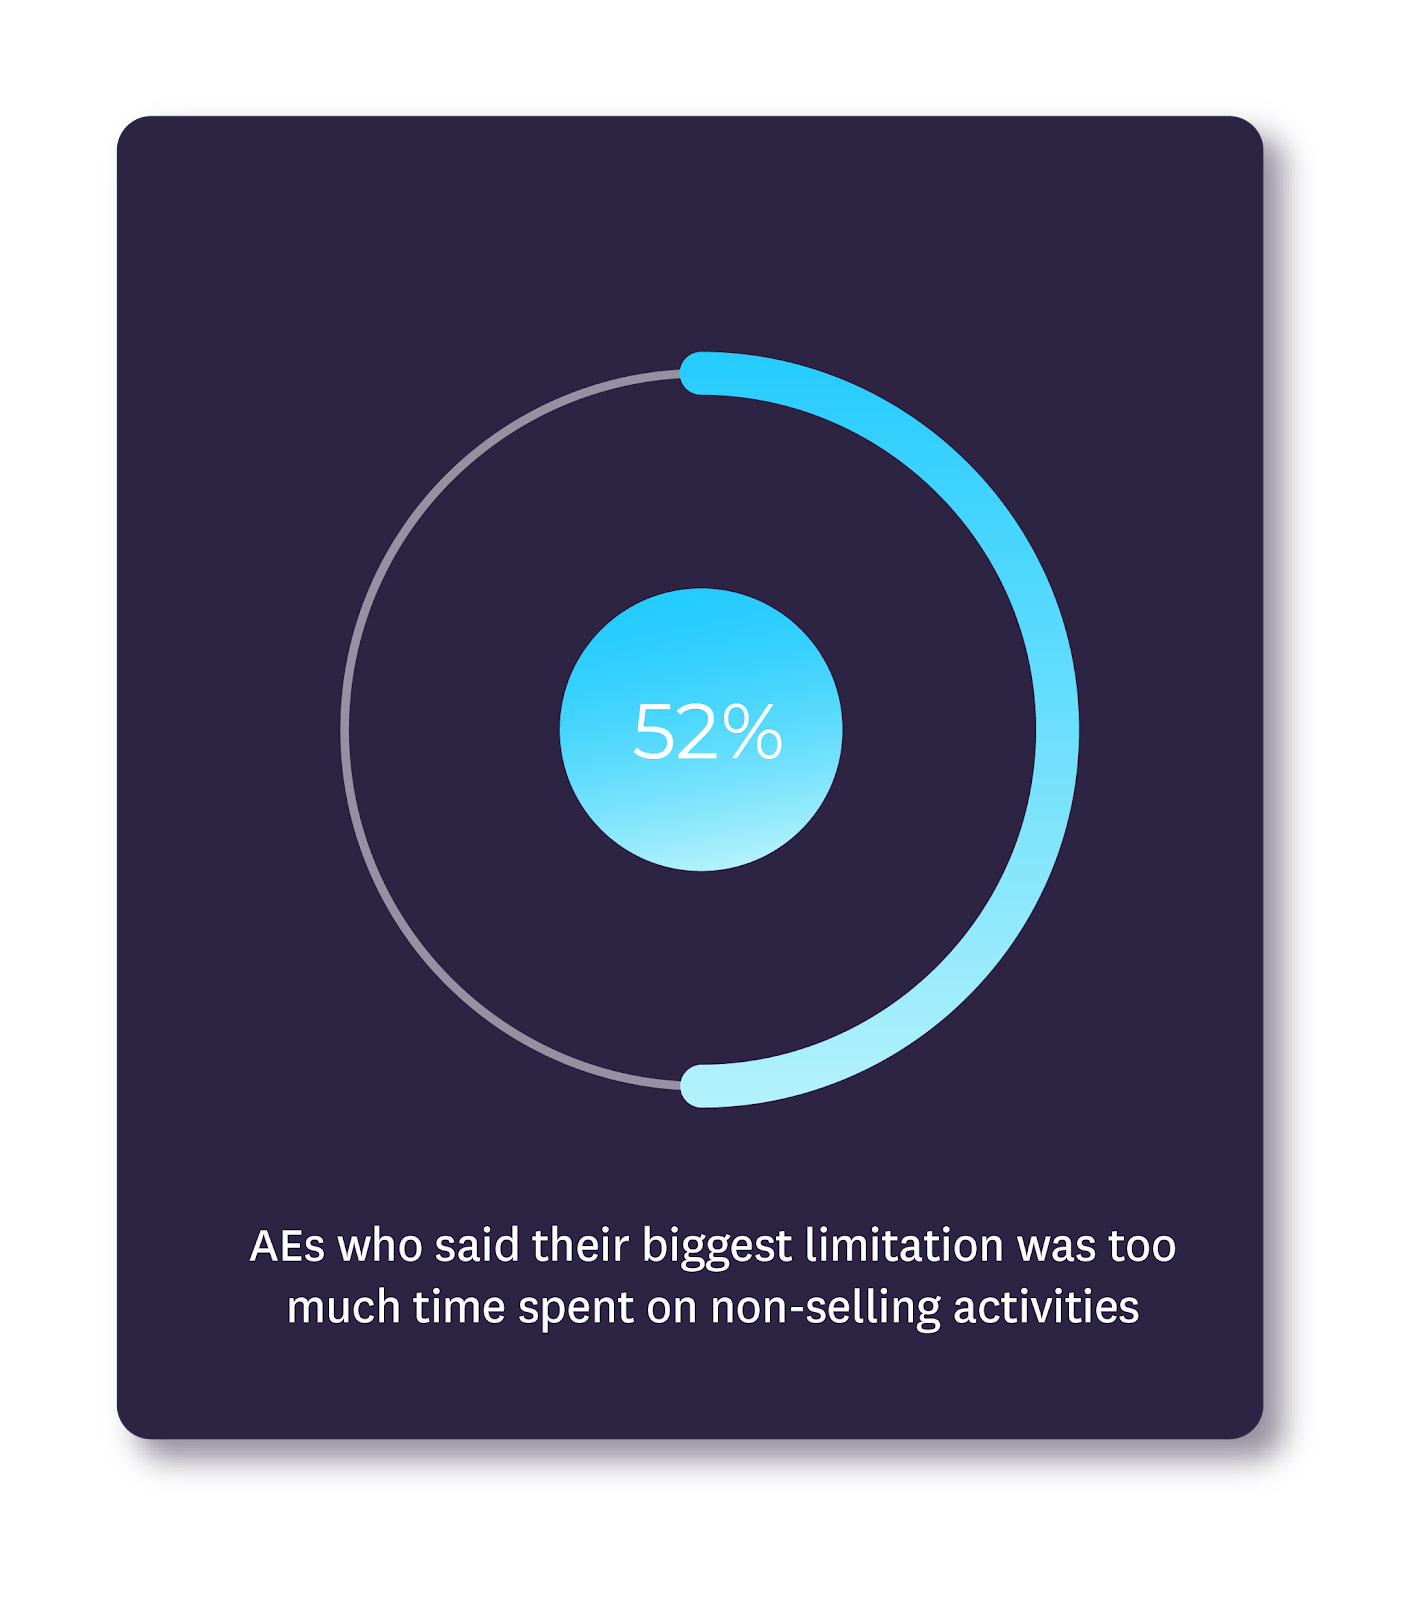 purple graphic showing that 52% of AEs said their biggest limitation was spending time on non selling activities